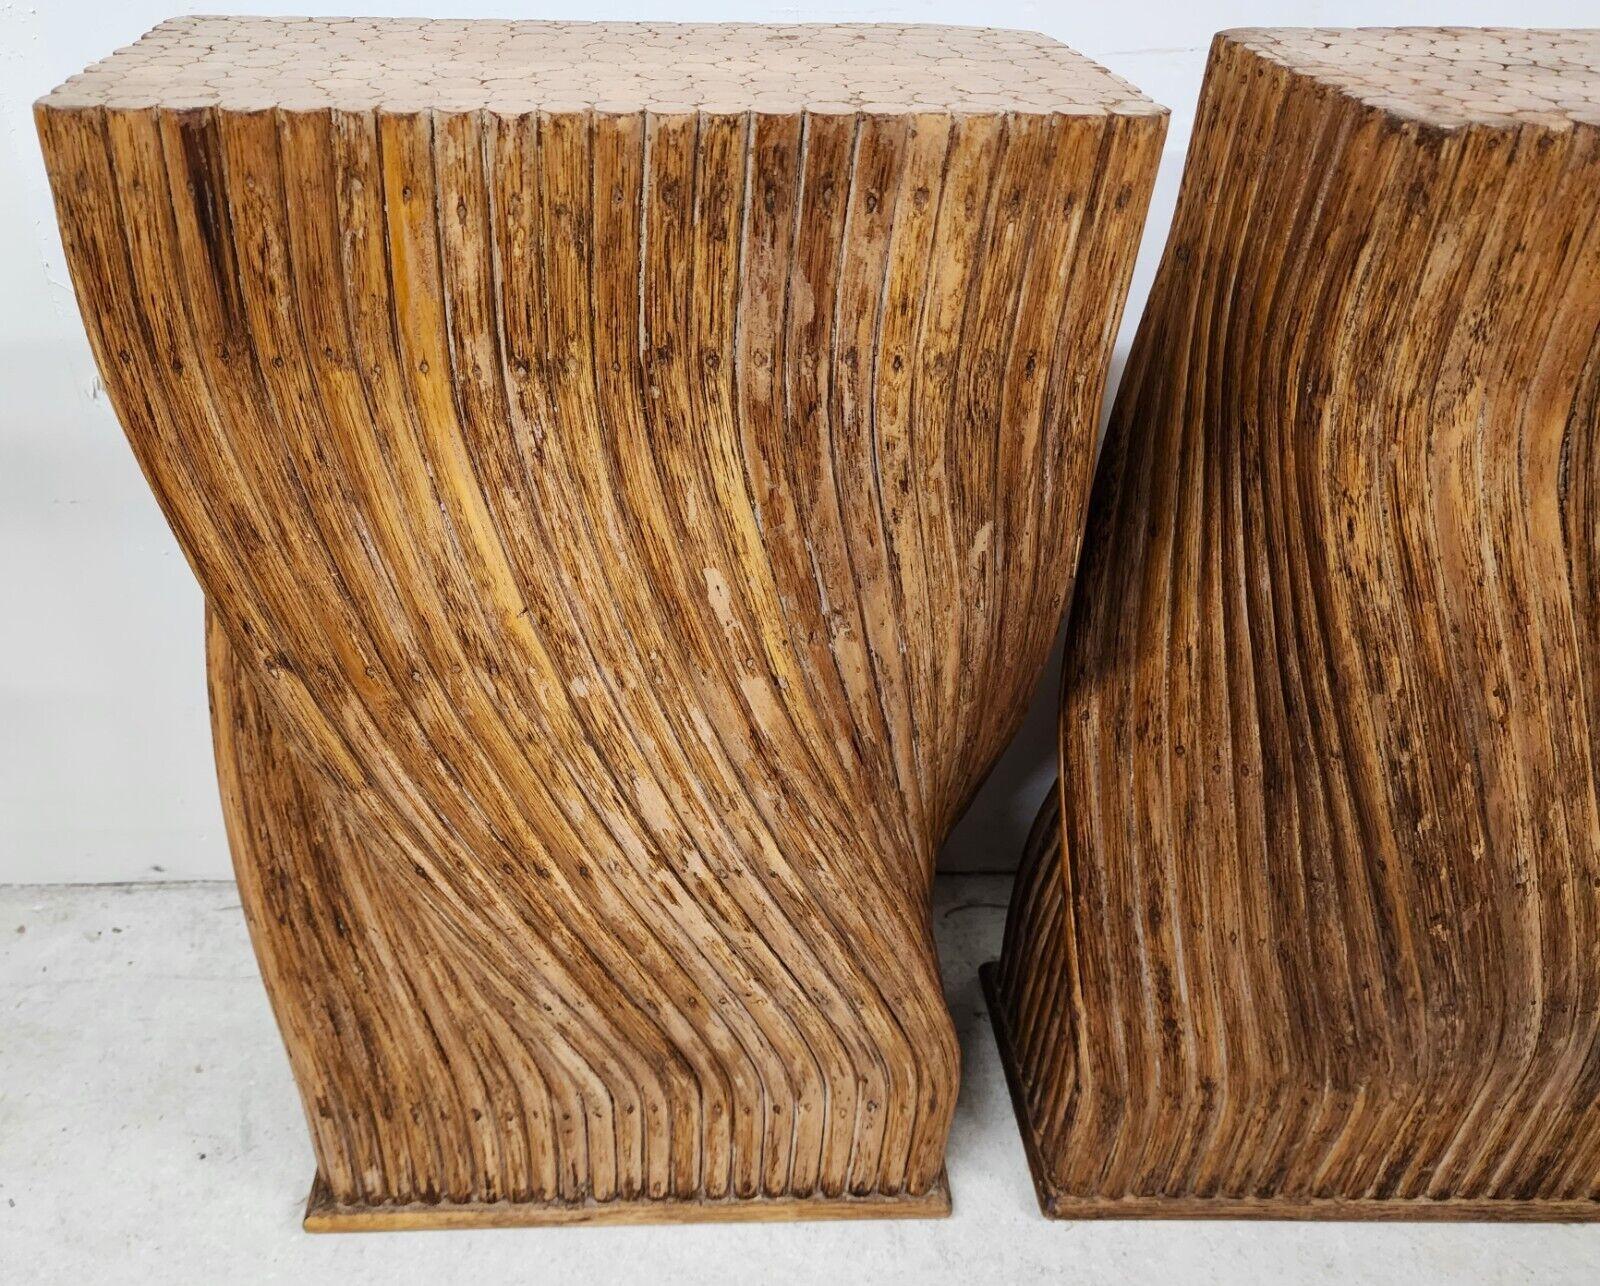 For FULL item description click on CONTINUE READING at the bottom of this page.

Offering One Of Our Recent Palm Beach Estate Fine Furniture Acquisitions Of A 
Set of 2 Vintage Bamboo Dining Console Table Bases Pedestals by McGuire

Approximate